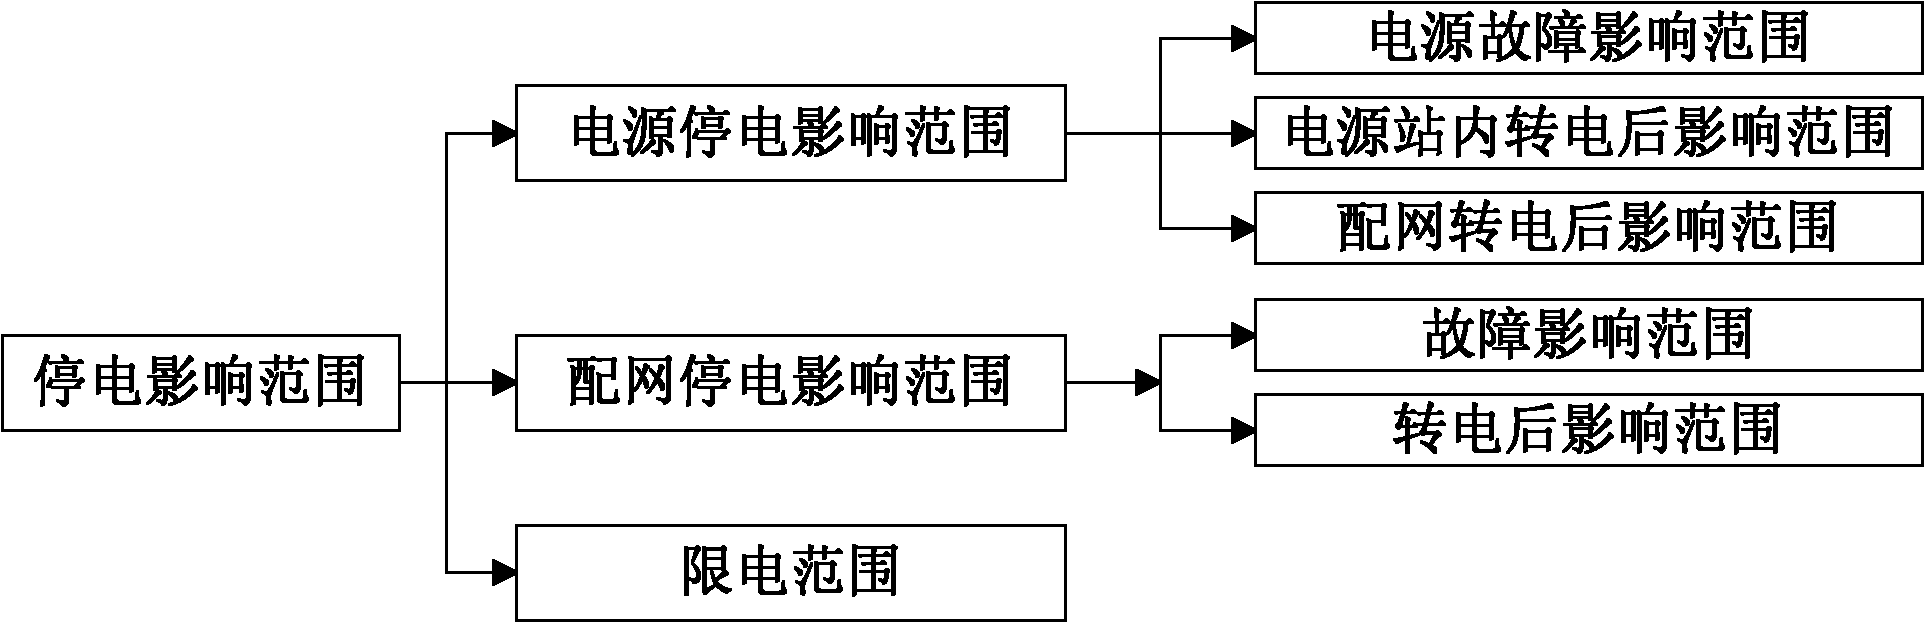 Evaluation method for distribution network reliability